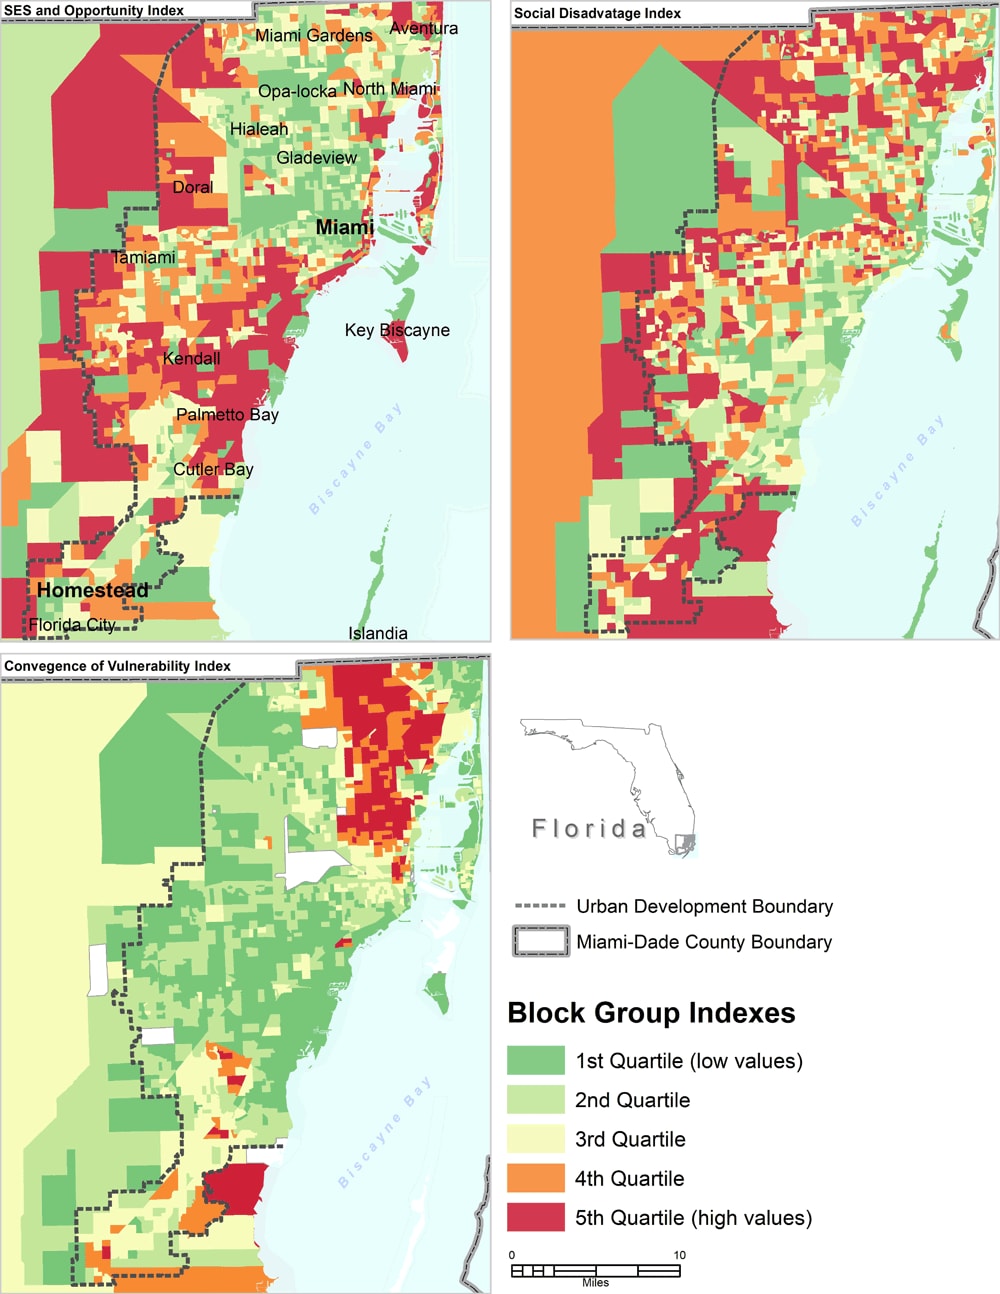 Maps of selected composite measures of 3 social determinants of health indexes for census block groups in Miami–Dade County, Florida: socioeconomic status and opportunity index, social disadvantage index, and convergence of vulnerability index. Abbreviation: SES, socioeconomic status.